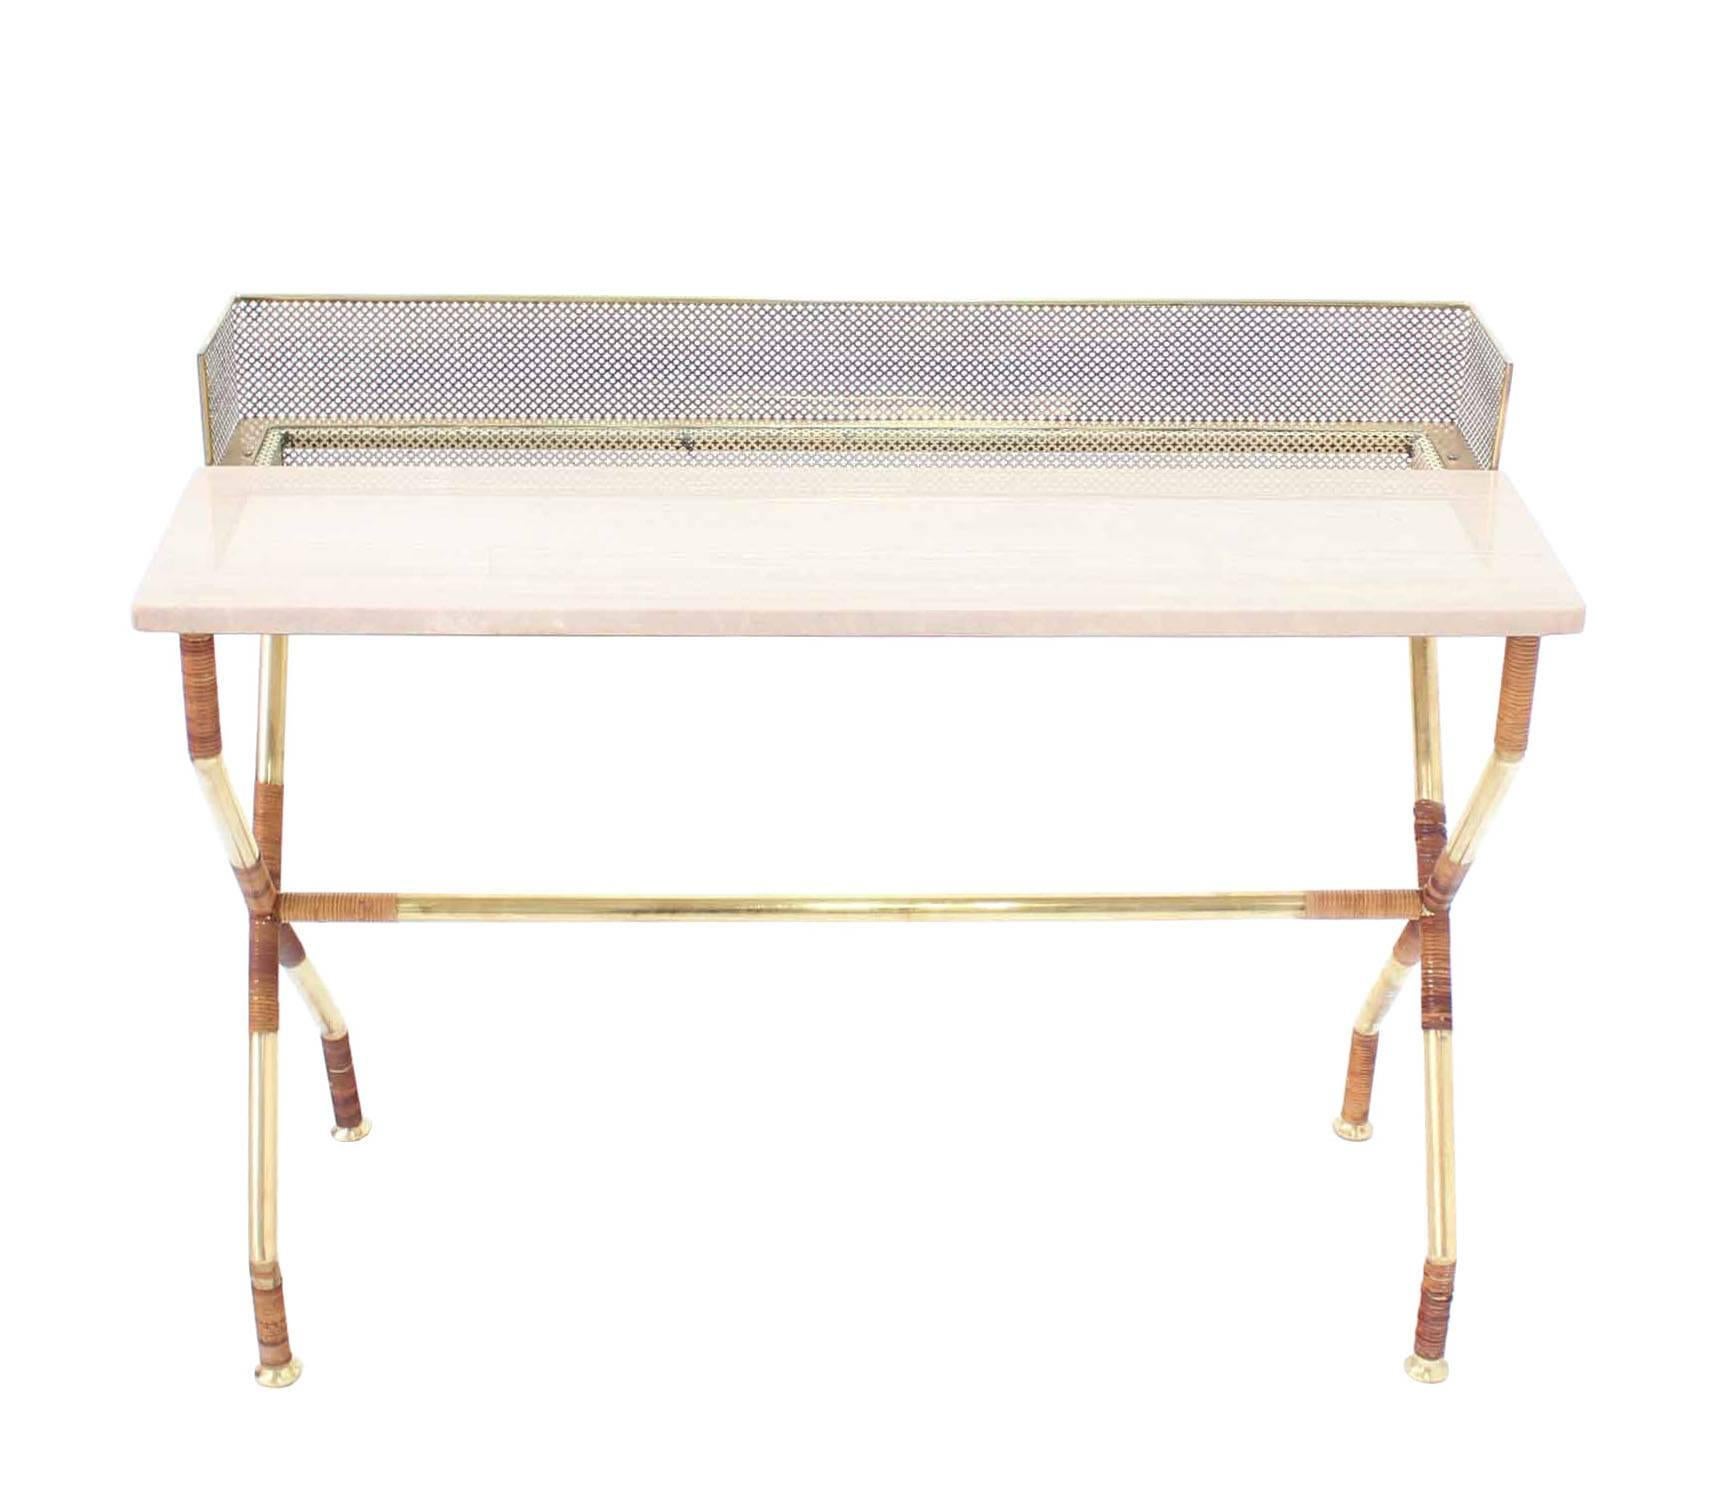 20th Century Rare X-Base Brass and Marble Travertine Top Console Table with Planter or Vanity For Sale